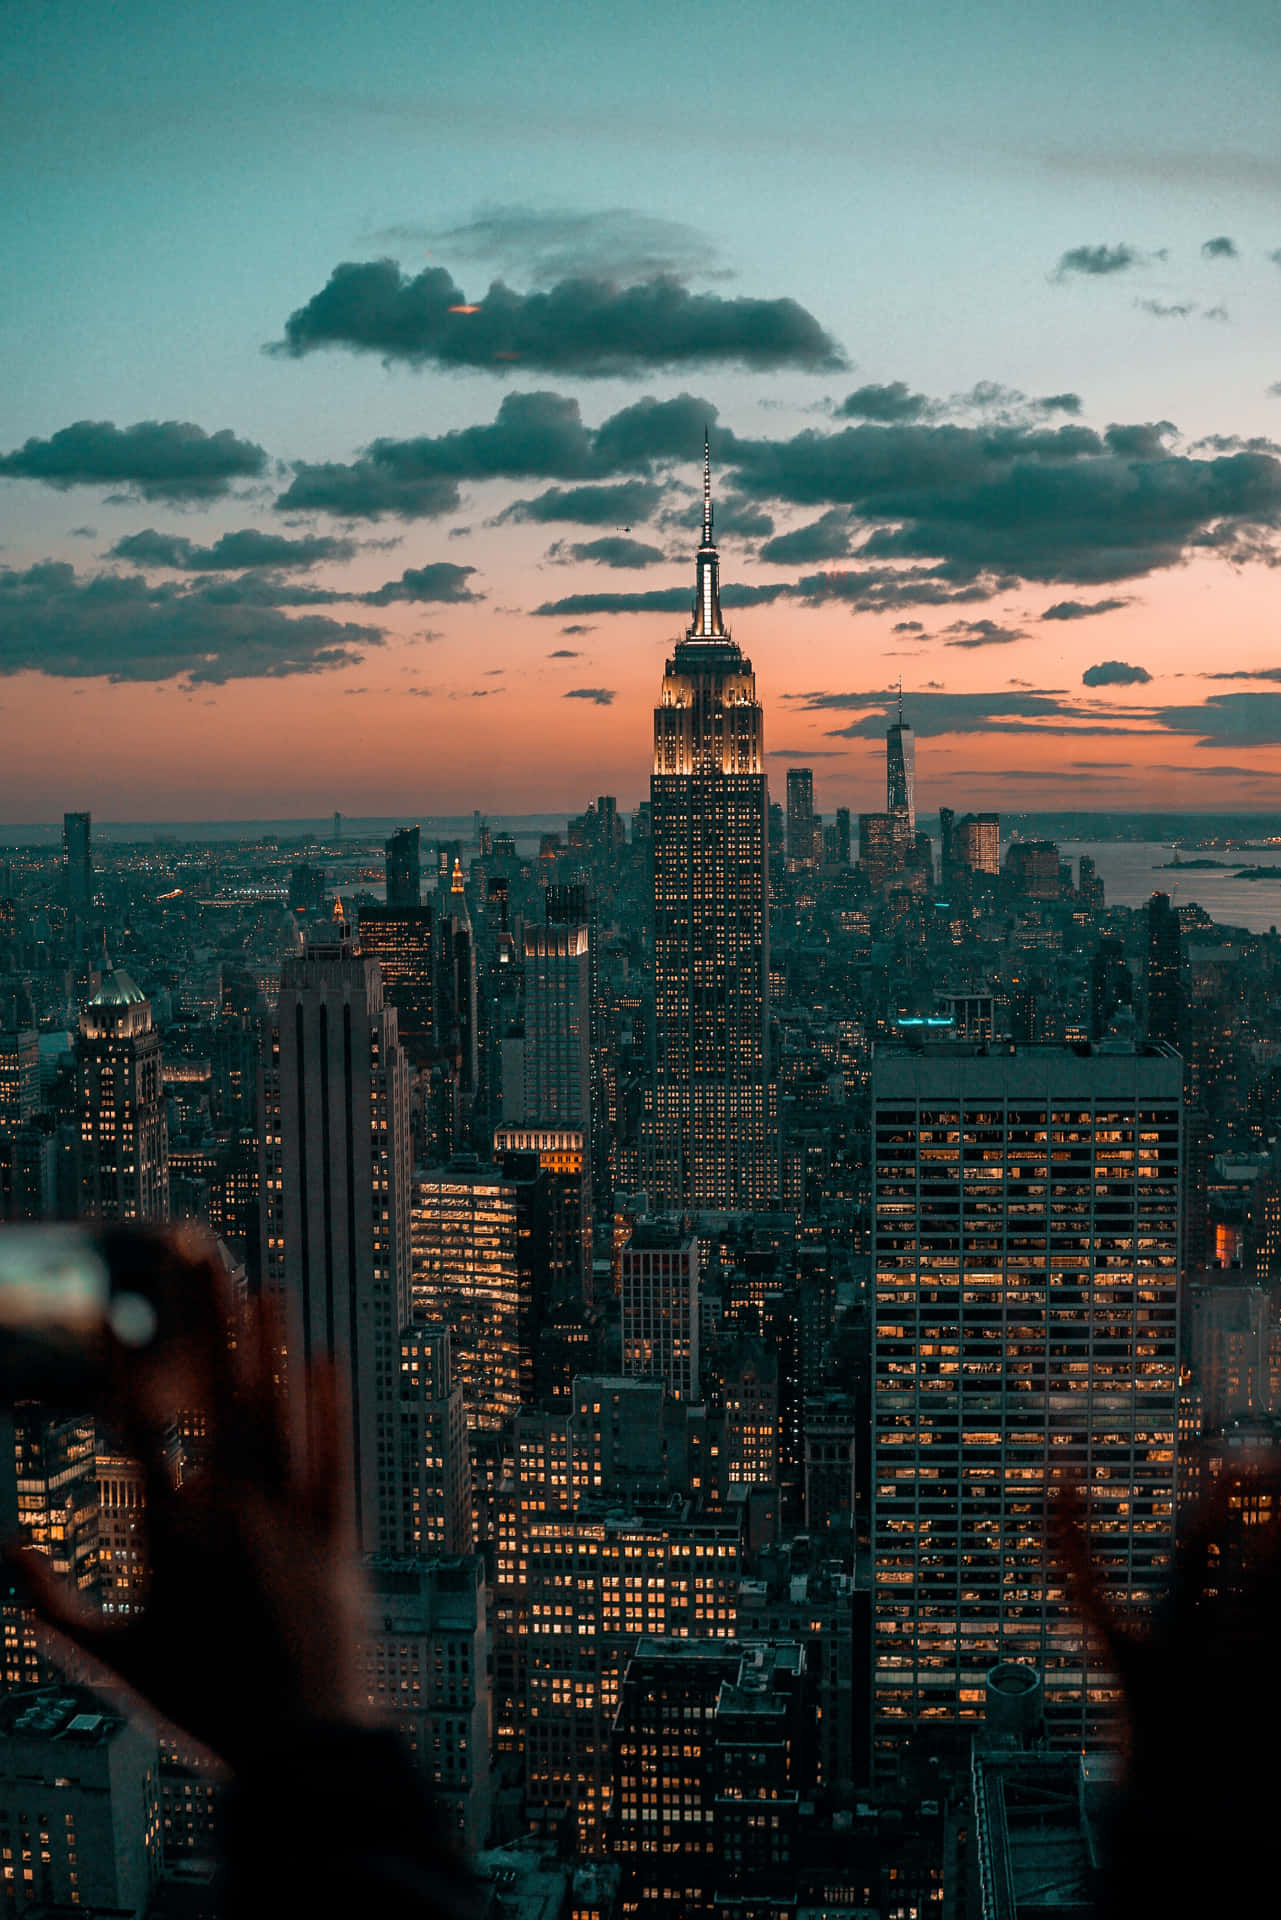 Majestic View Of The Empire State Building Under The Stunning Sunset Glow.